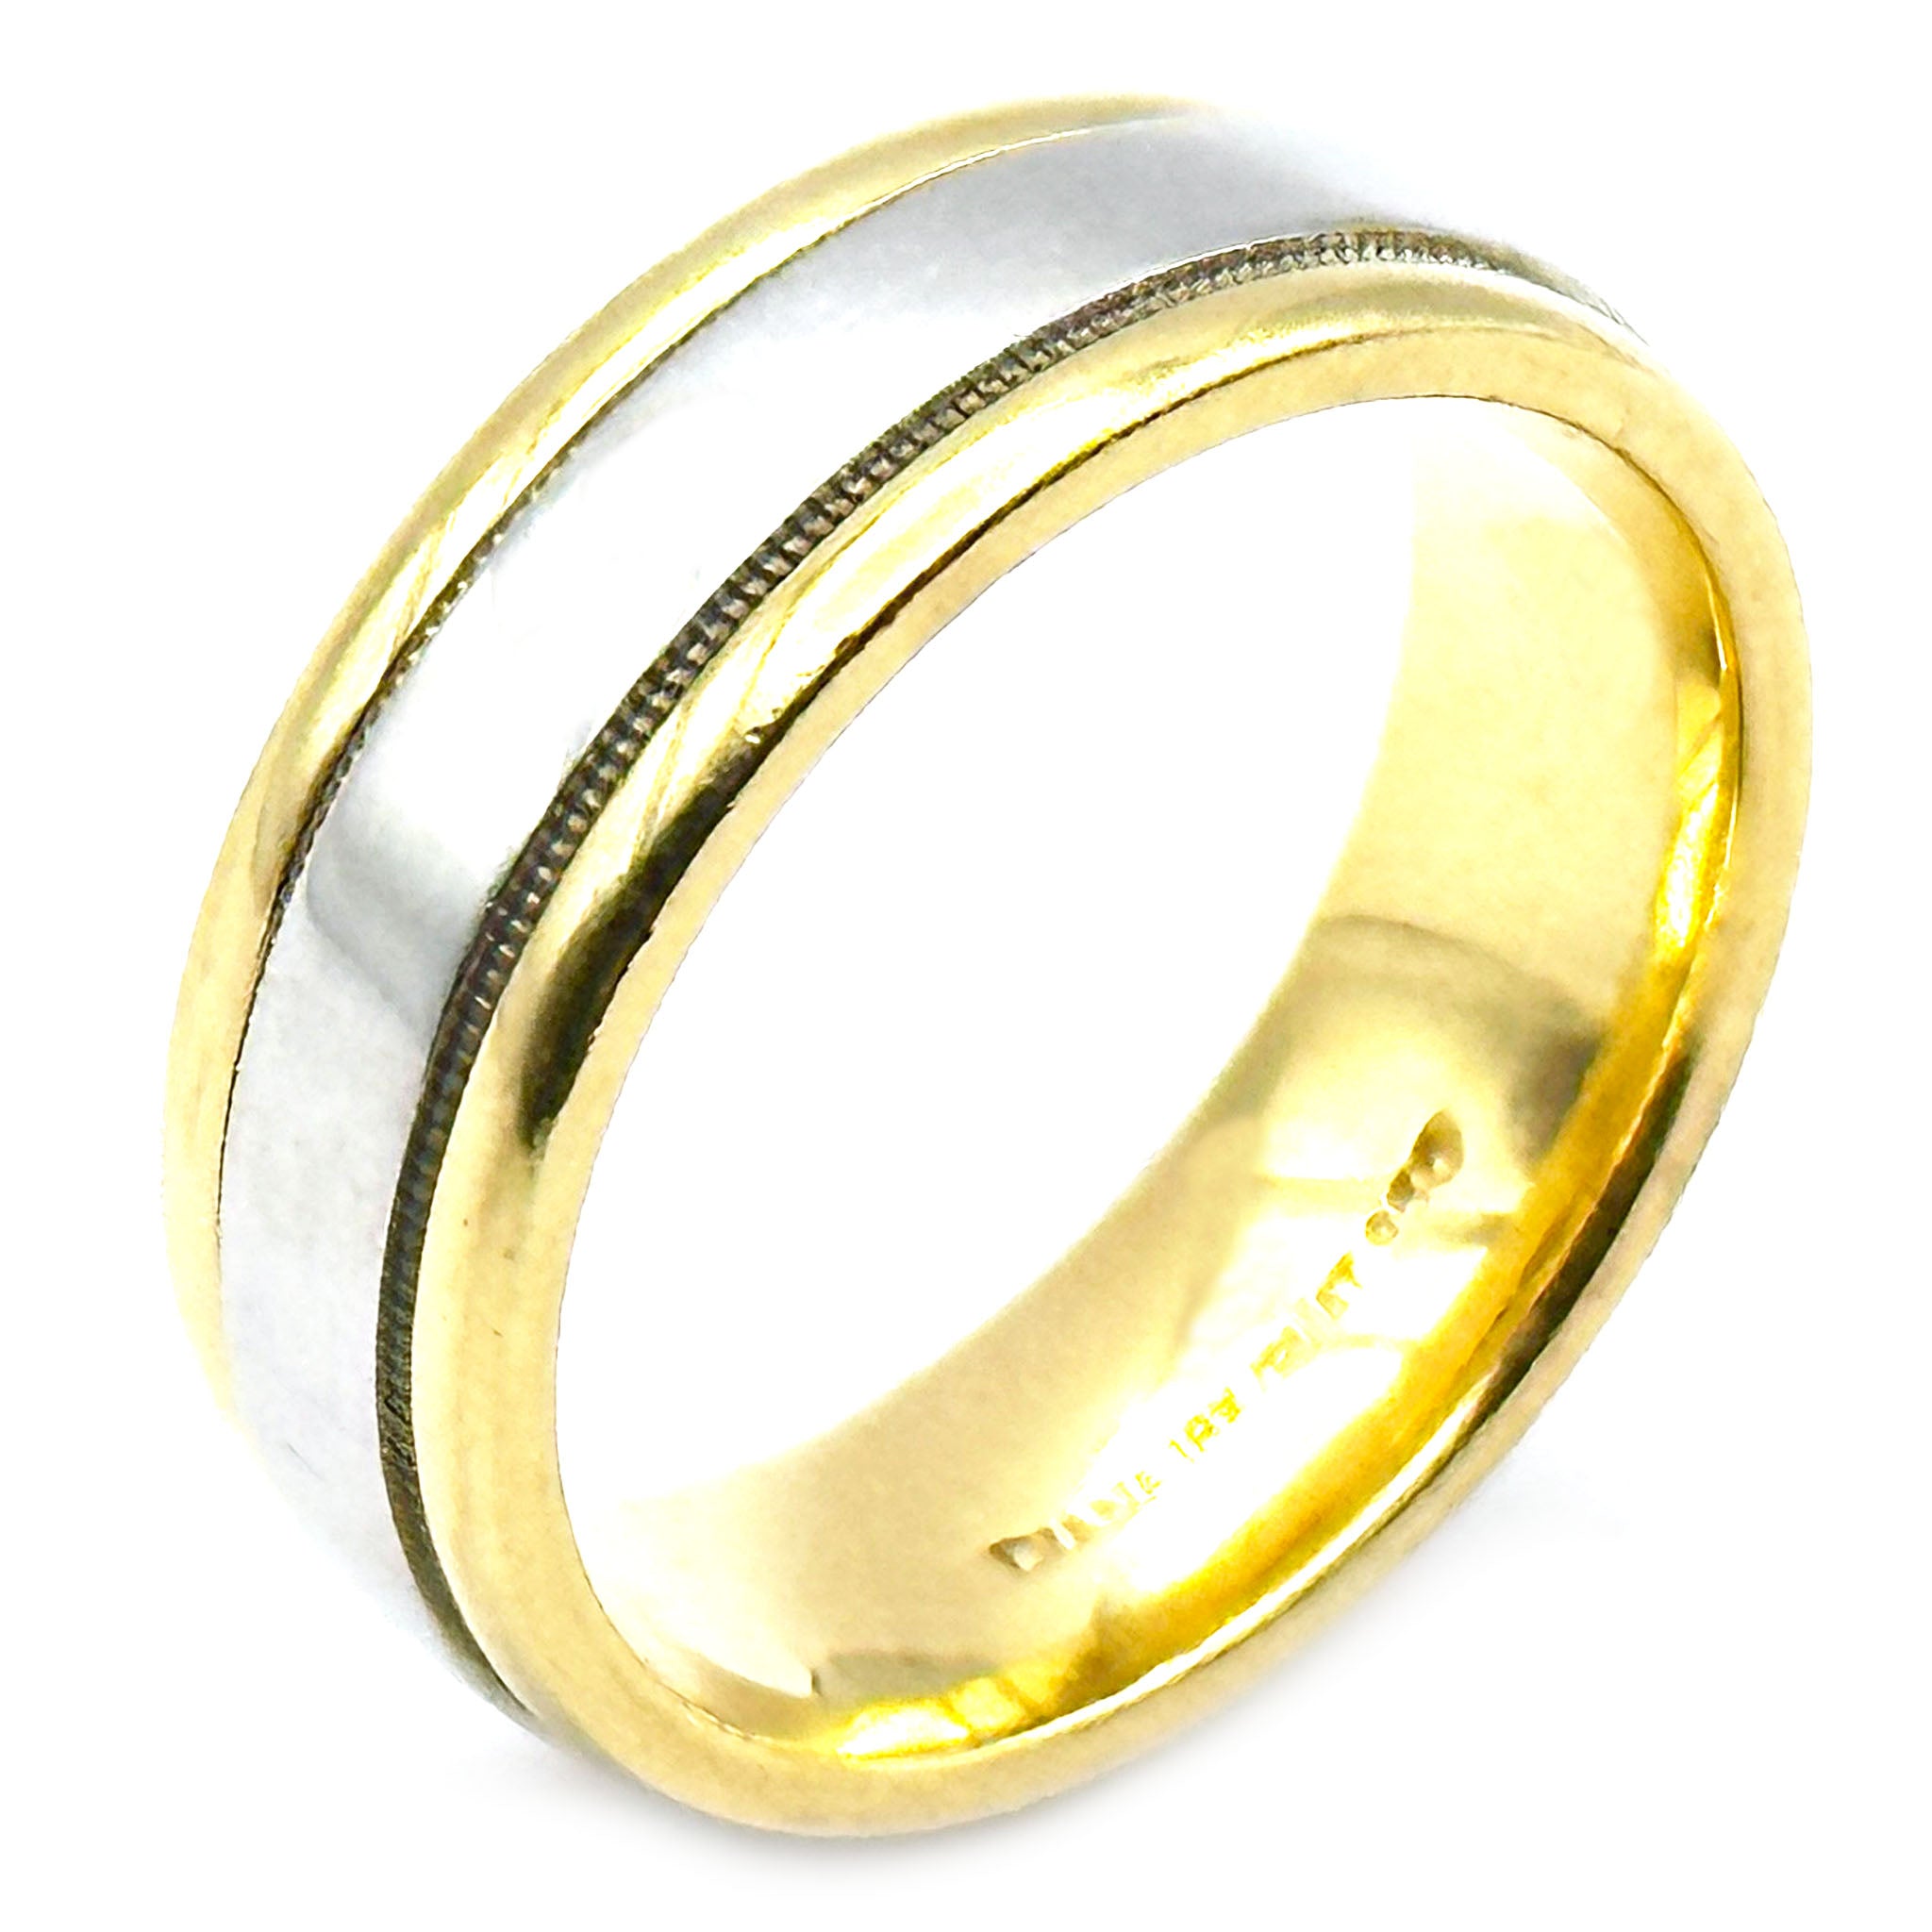 $2800 18Kt Yellow Gold and Platinum Women's Shiny Wedding Band 6mm Size 5.75